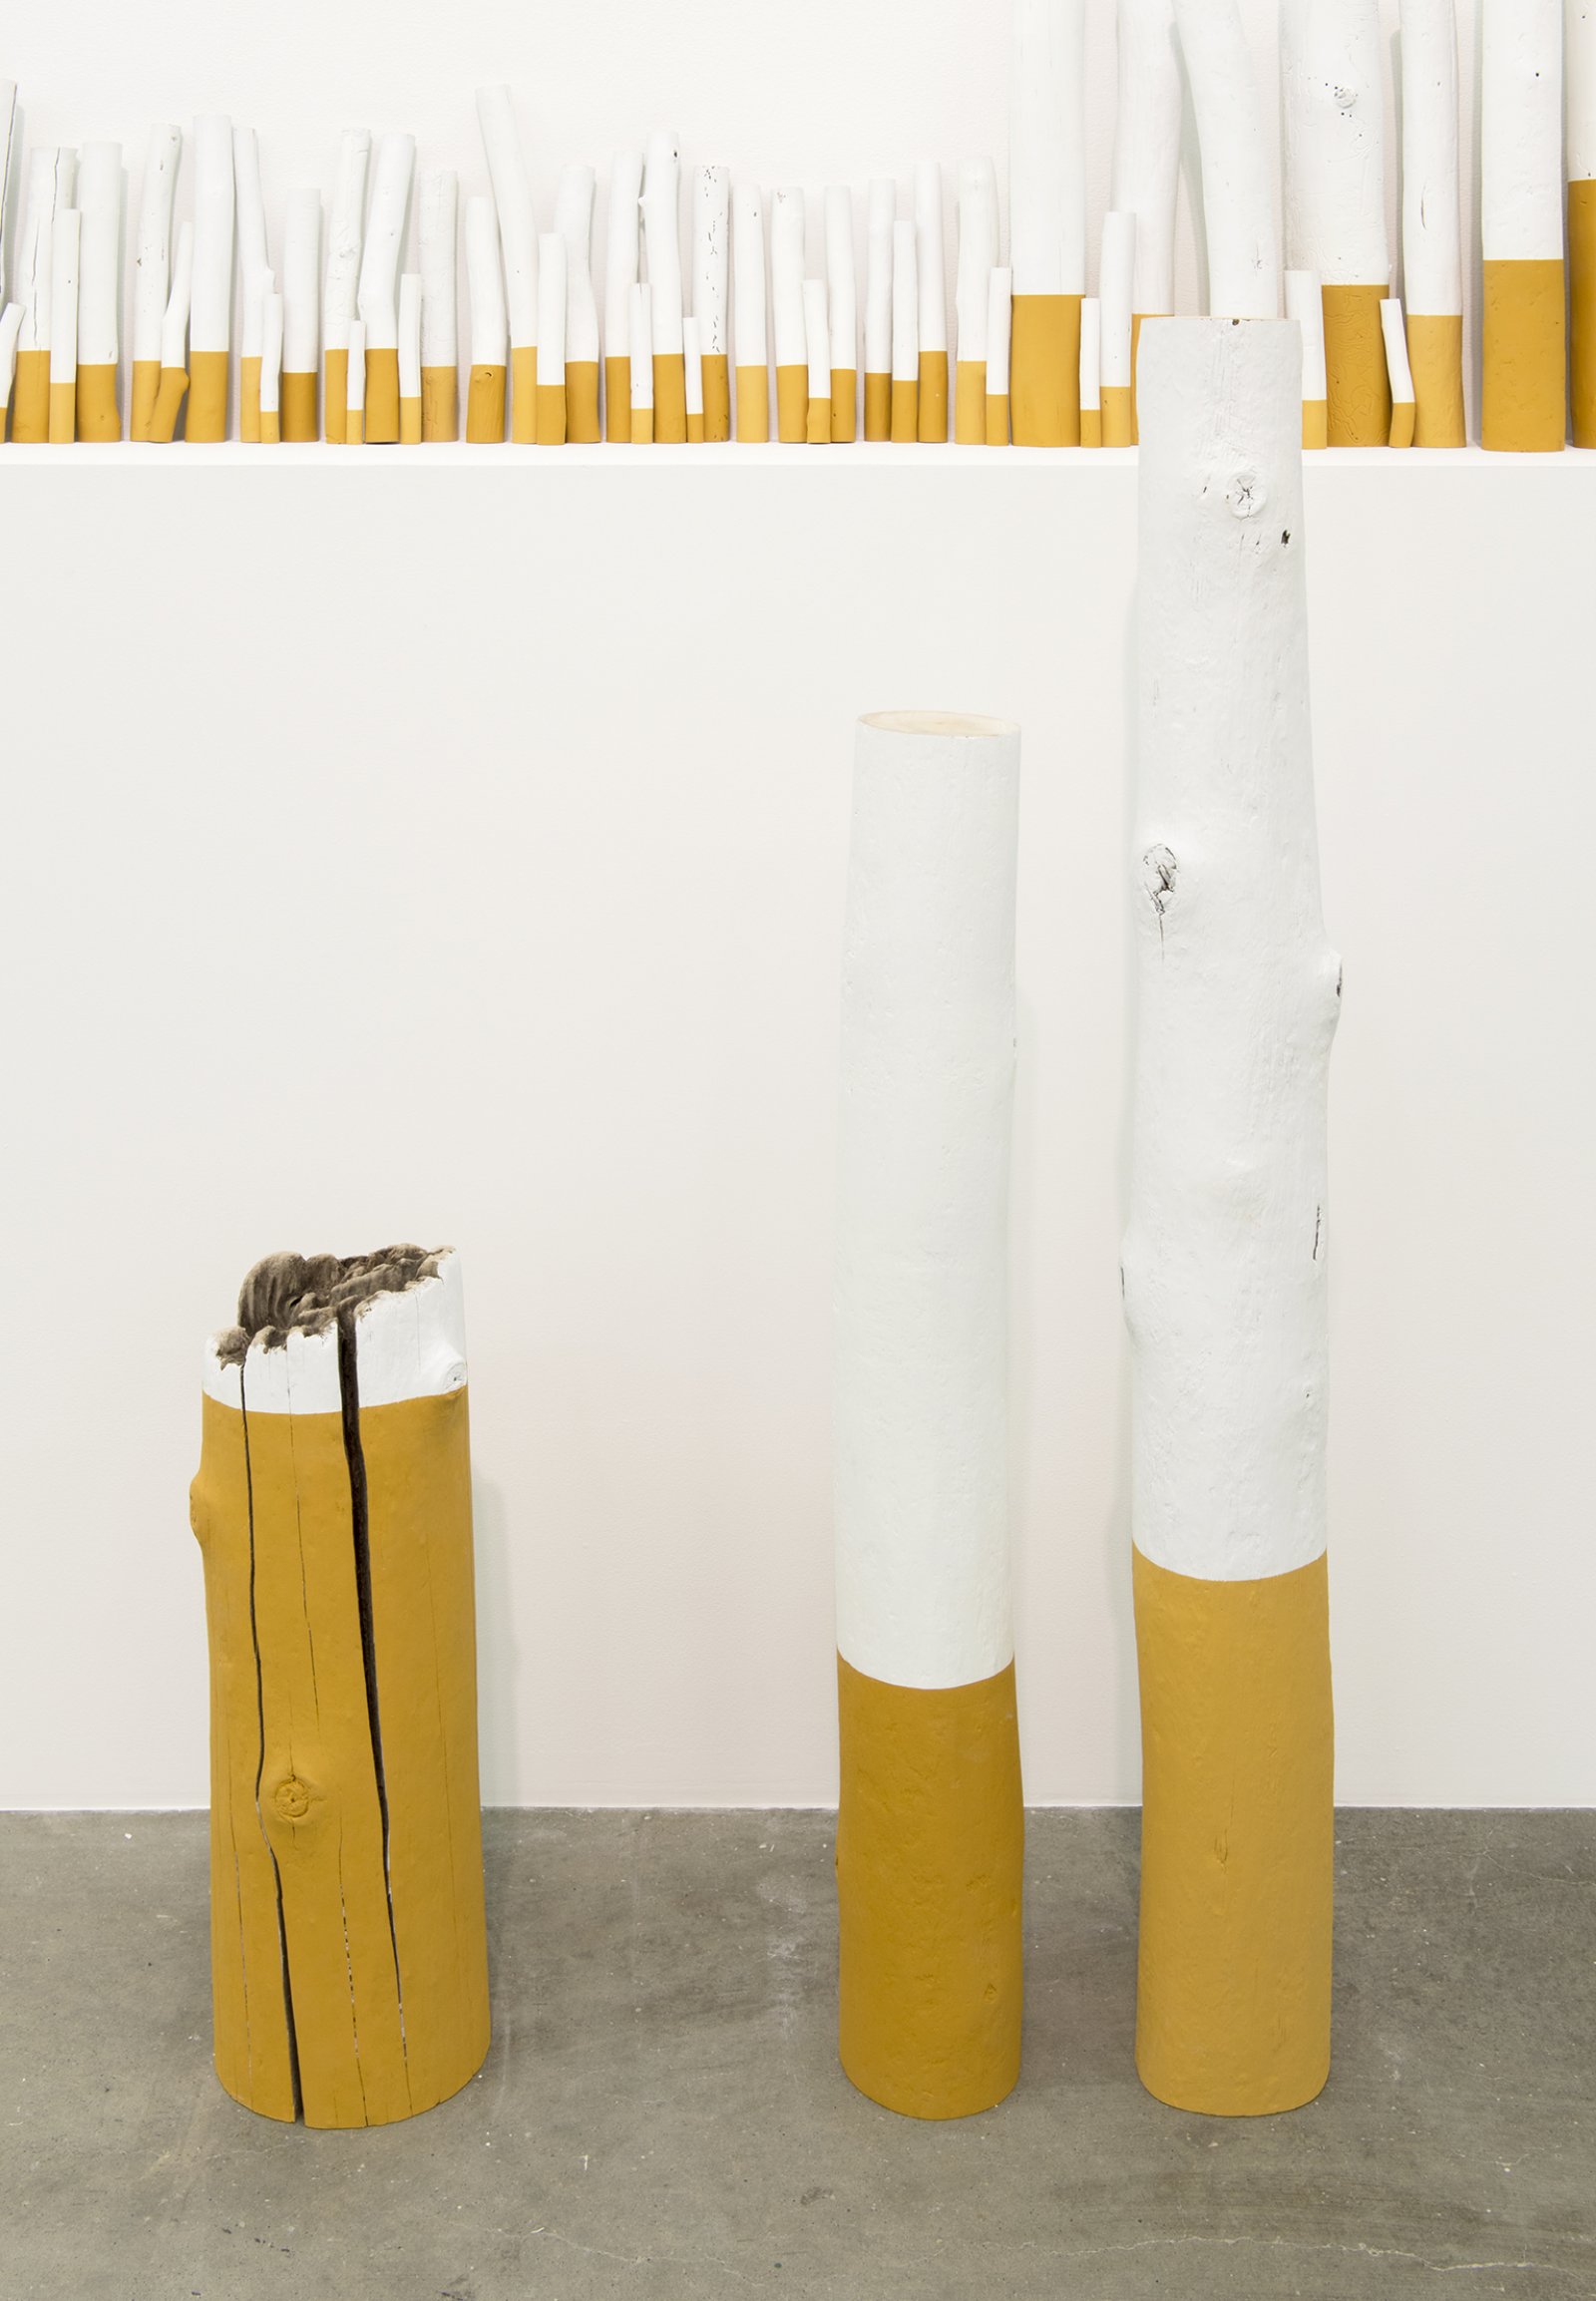 Liz Magor, The Rules (detail), 2012, wood, paint, 38 x 180 x 10 in. (97 x 457 x 25 cm) by Liz Magor